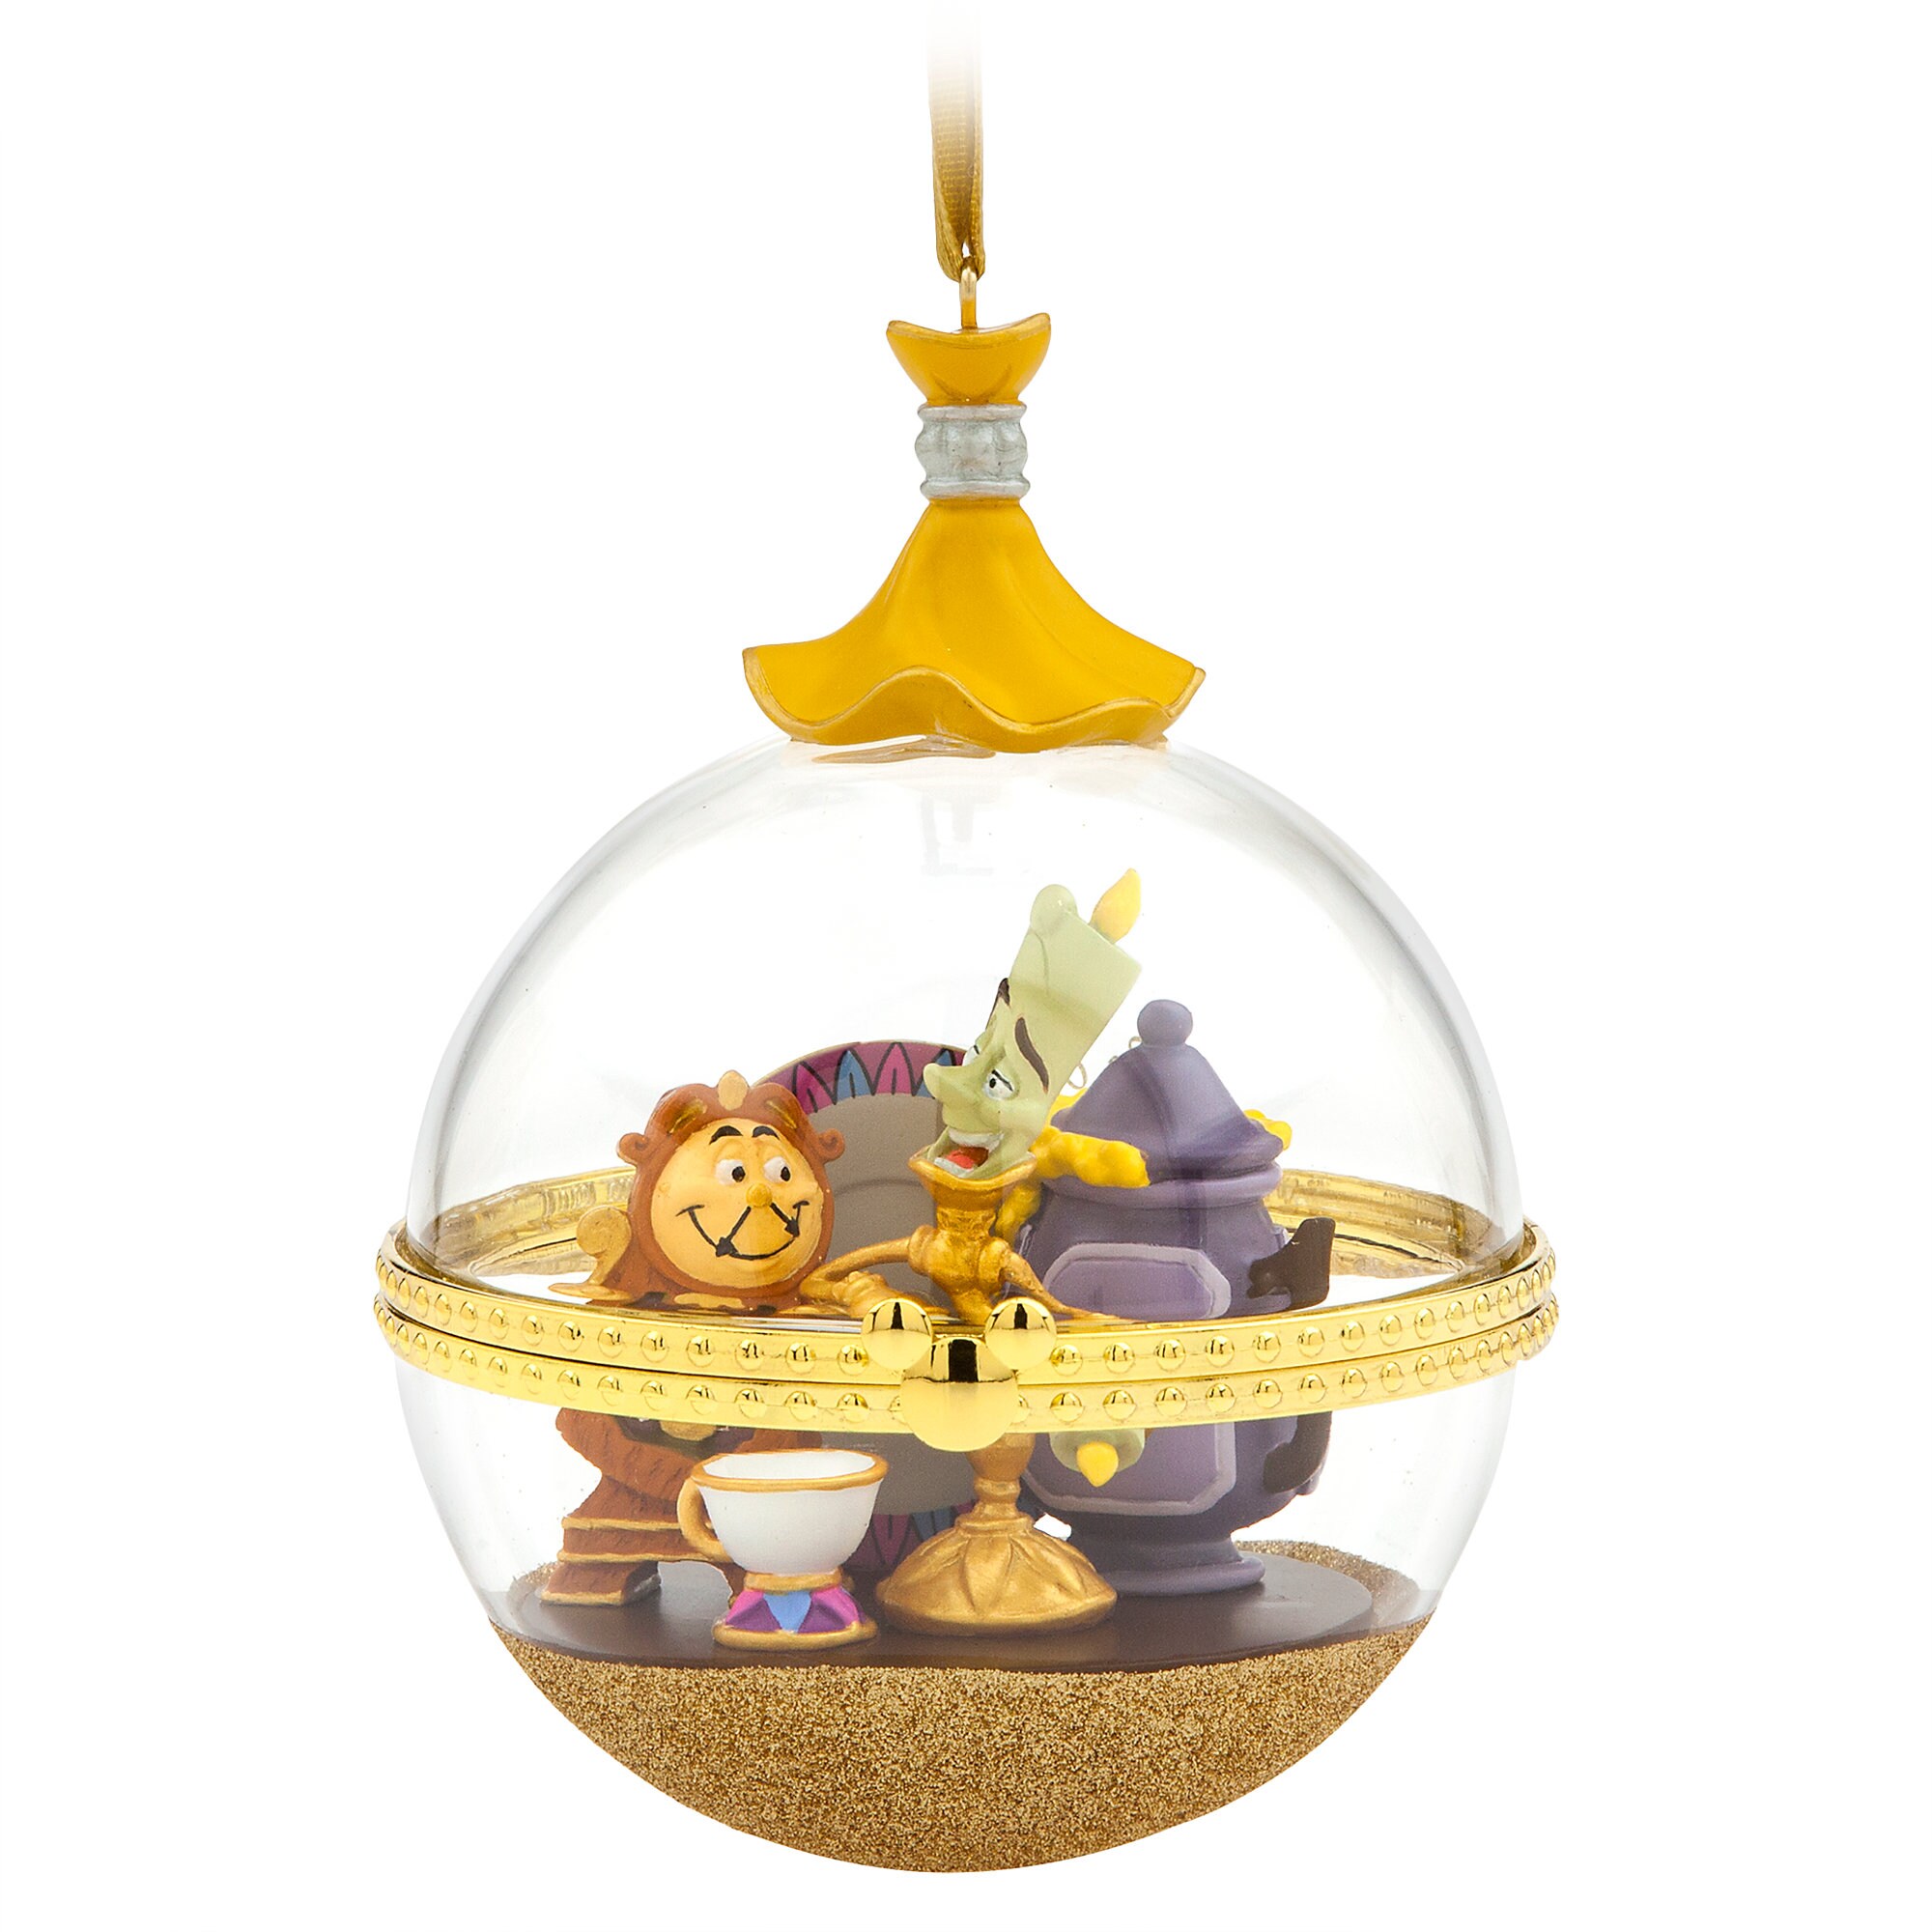 Lumiere and Cogsworth Disney Duos Sketchbook Ornament - Beauty and the Beast - March - Limited Release